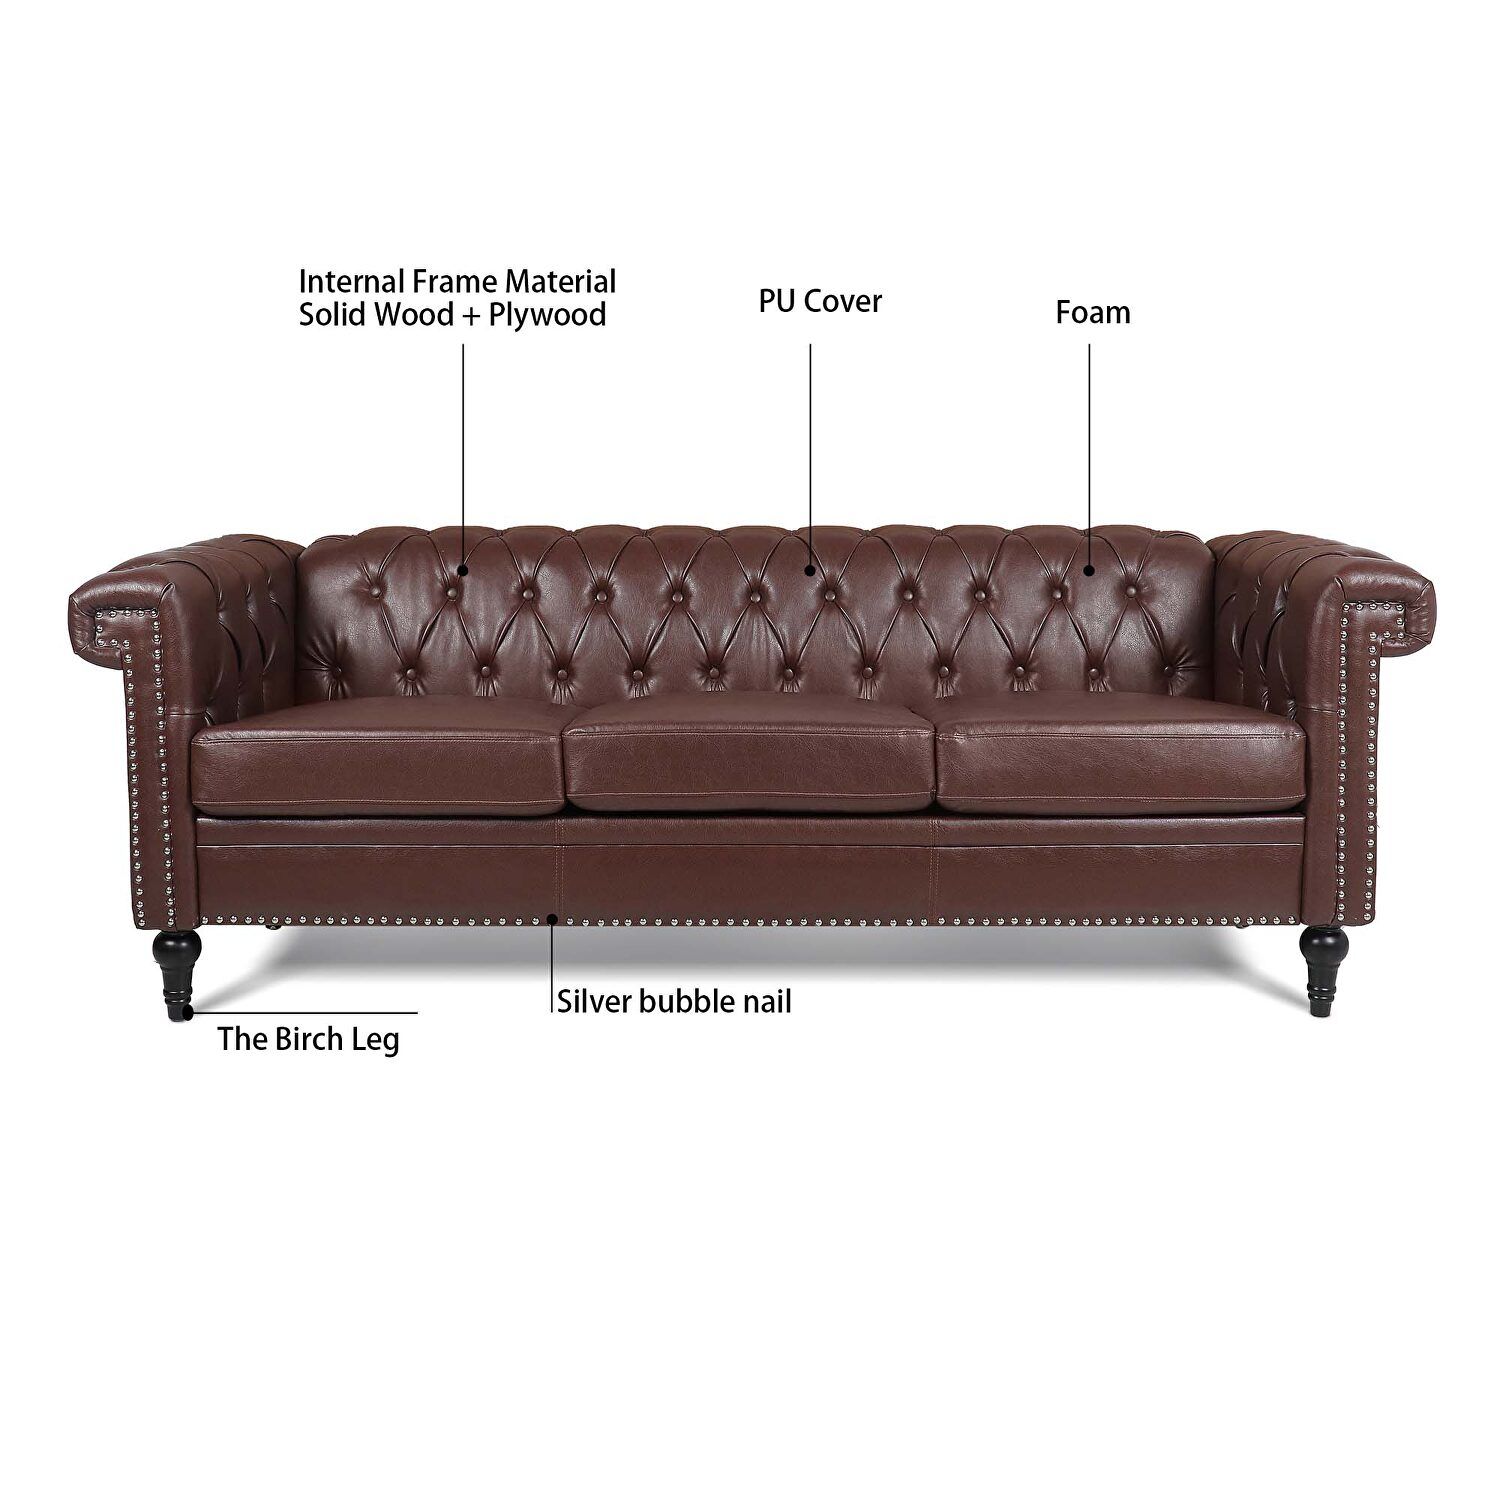 La Spezia D928 Brown Sofa W68042995 | Comfyco Throughout Traditional 3 Seater Sofas (View 9 of 15)